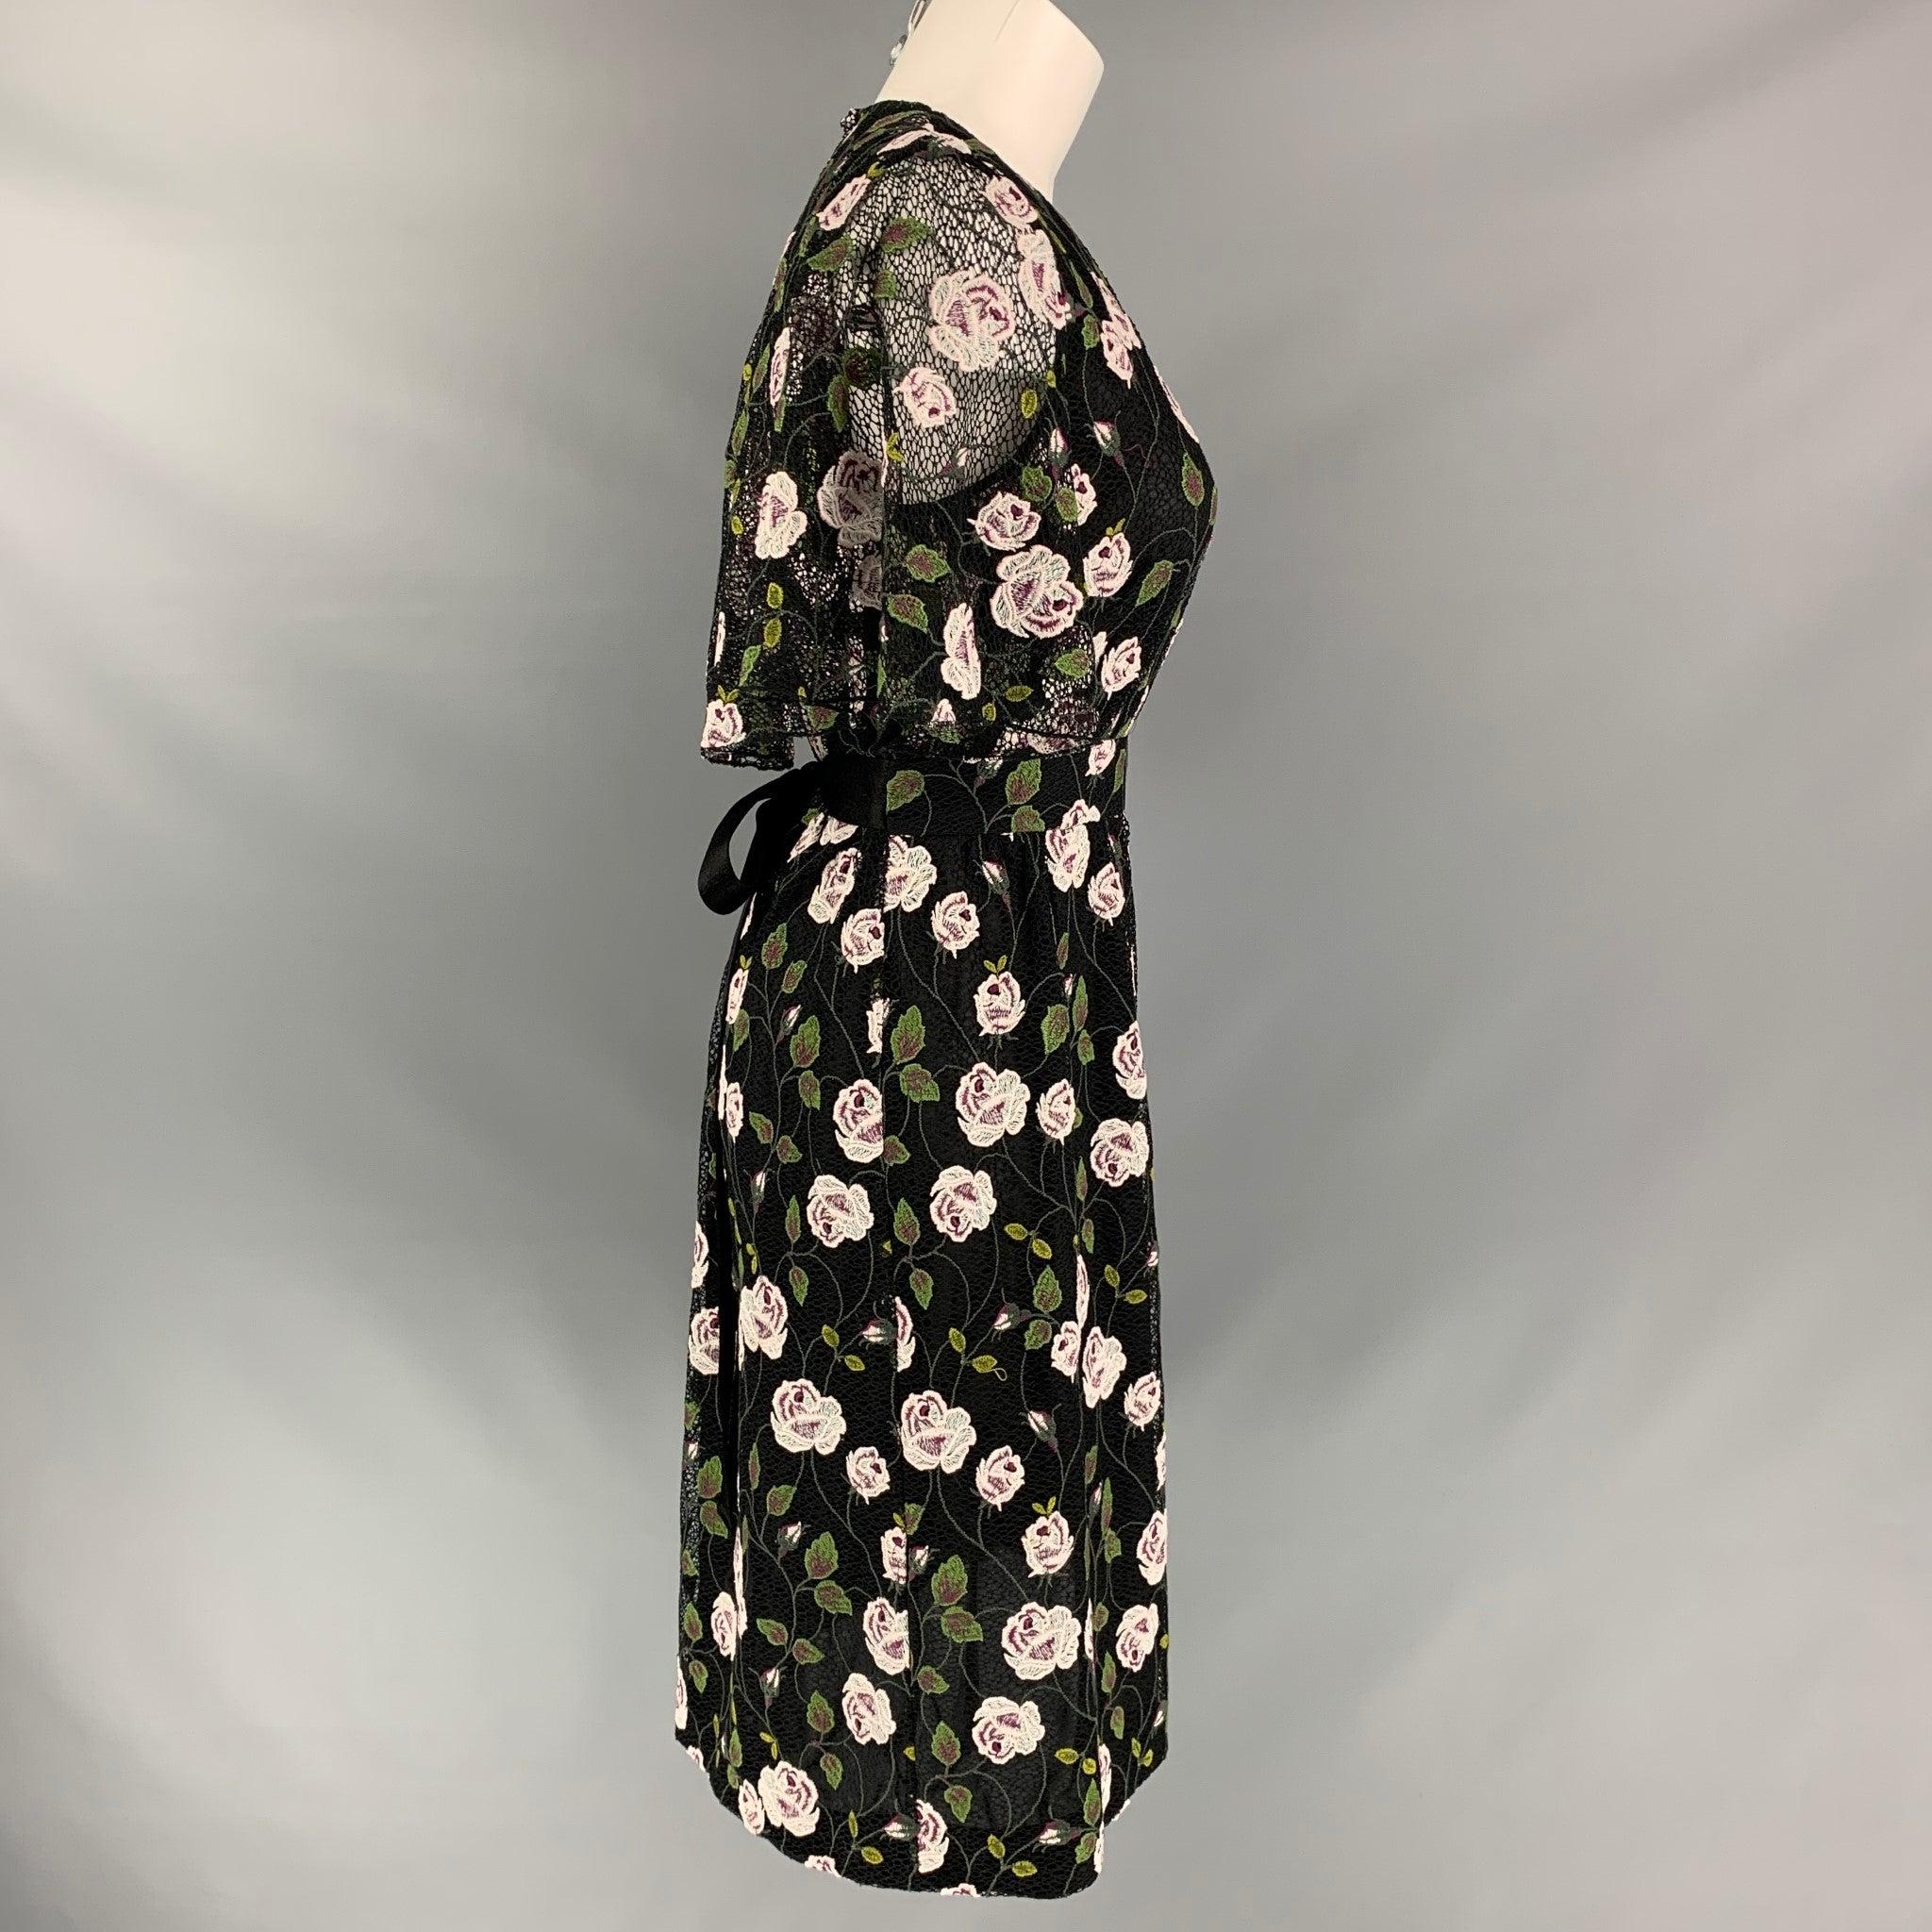 GIAMBATTISTA VALLI cape-sleeve knee high dress comes in black cotton and polyester lace fabric and side half invisible zipper closure featuring floral lace, cape see through cape sleeve and adjustable tie at back. Made in Italy.
Excellent Good